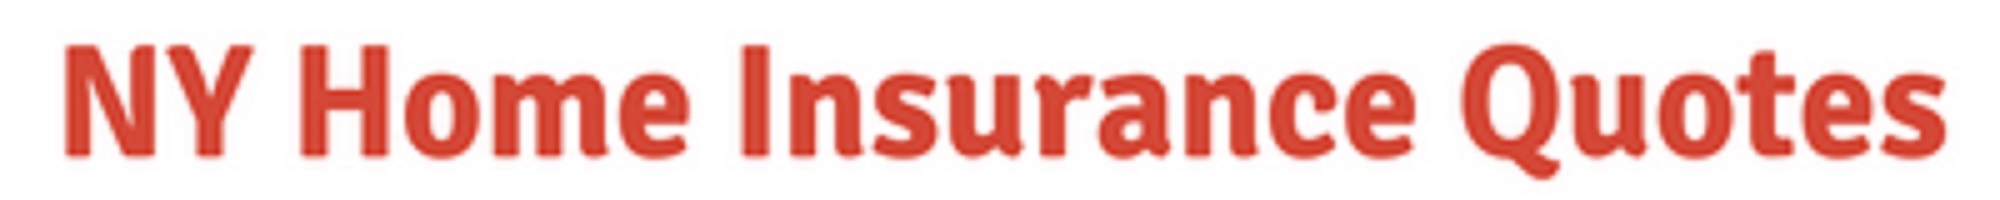 Home Insurance Quotes's Logo